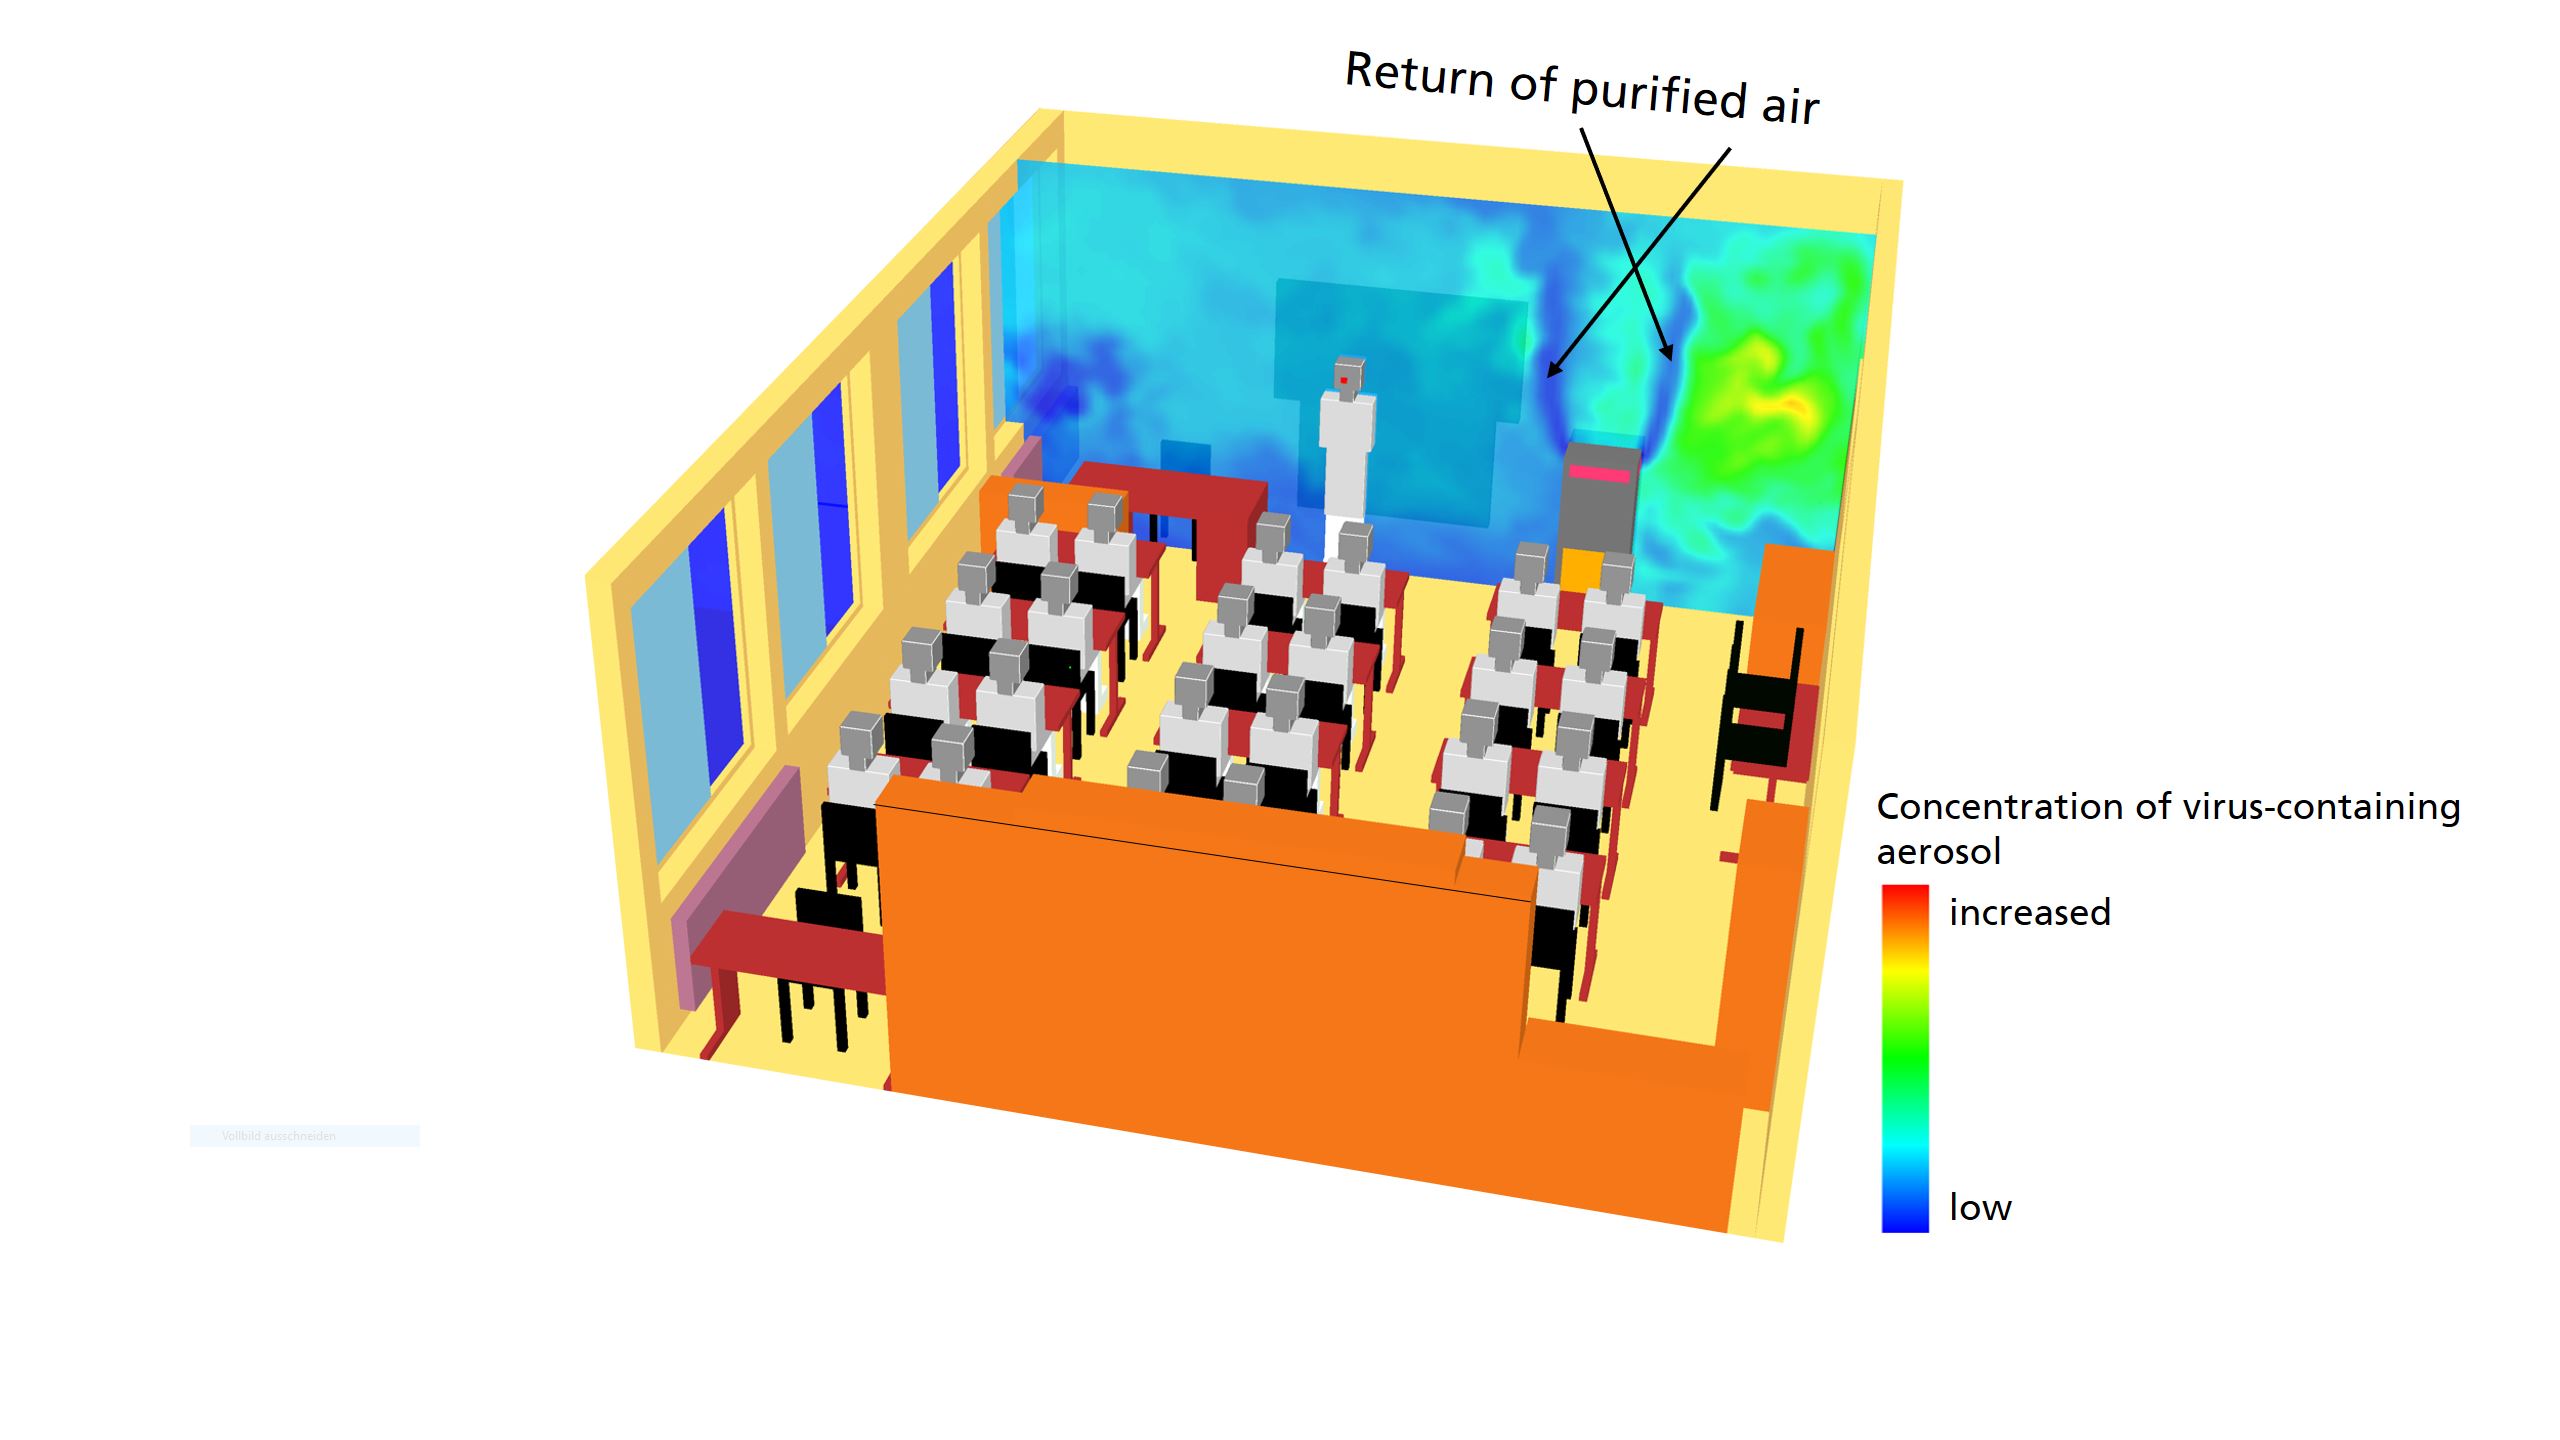 Numerical simulation of the aerosol dispersion within a classroom